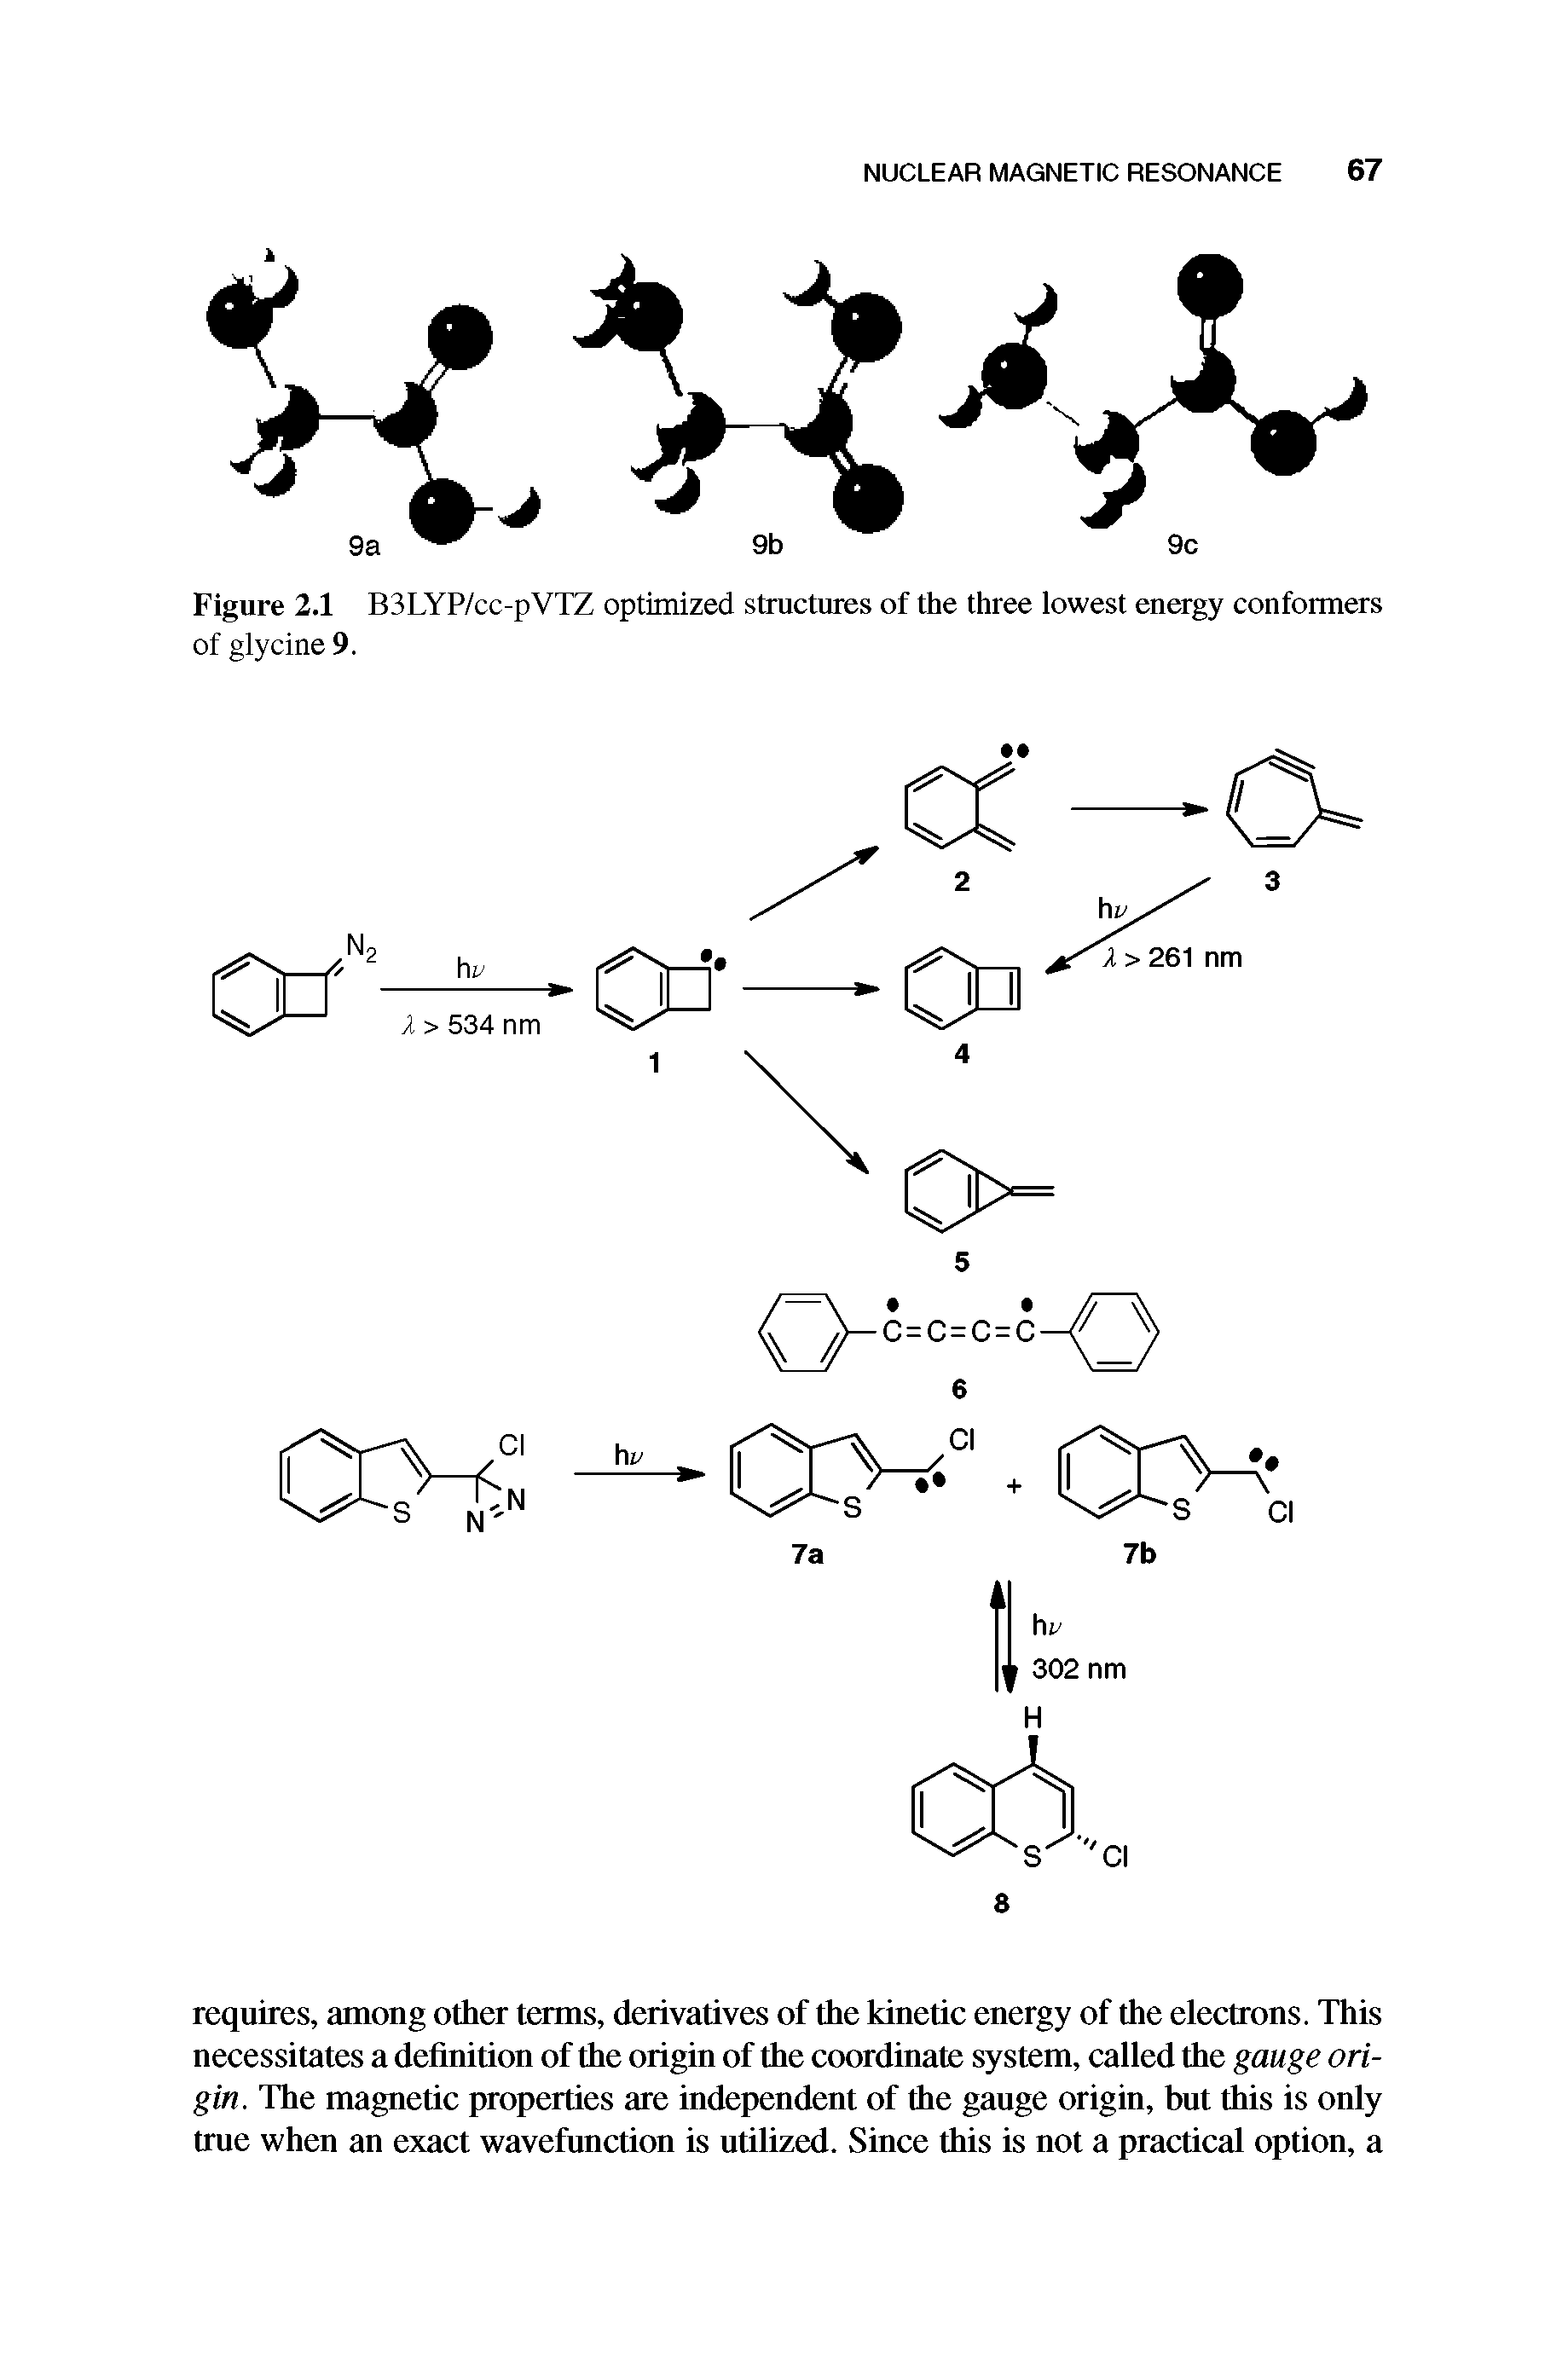 Figure 2.1 B3LYP/cc-pVTZ optimized structures of the three lowest energy conformers of glycine 9.